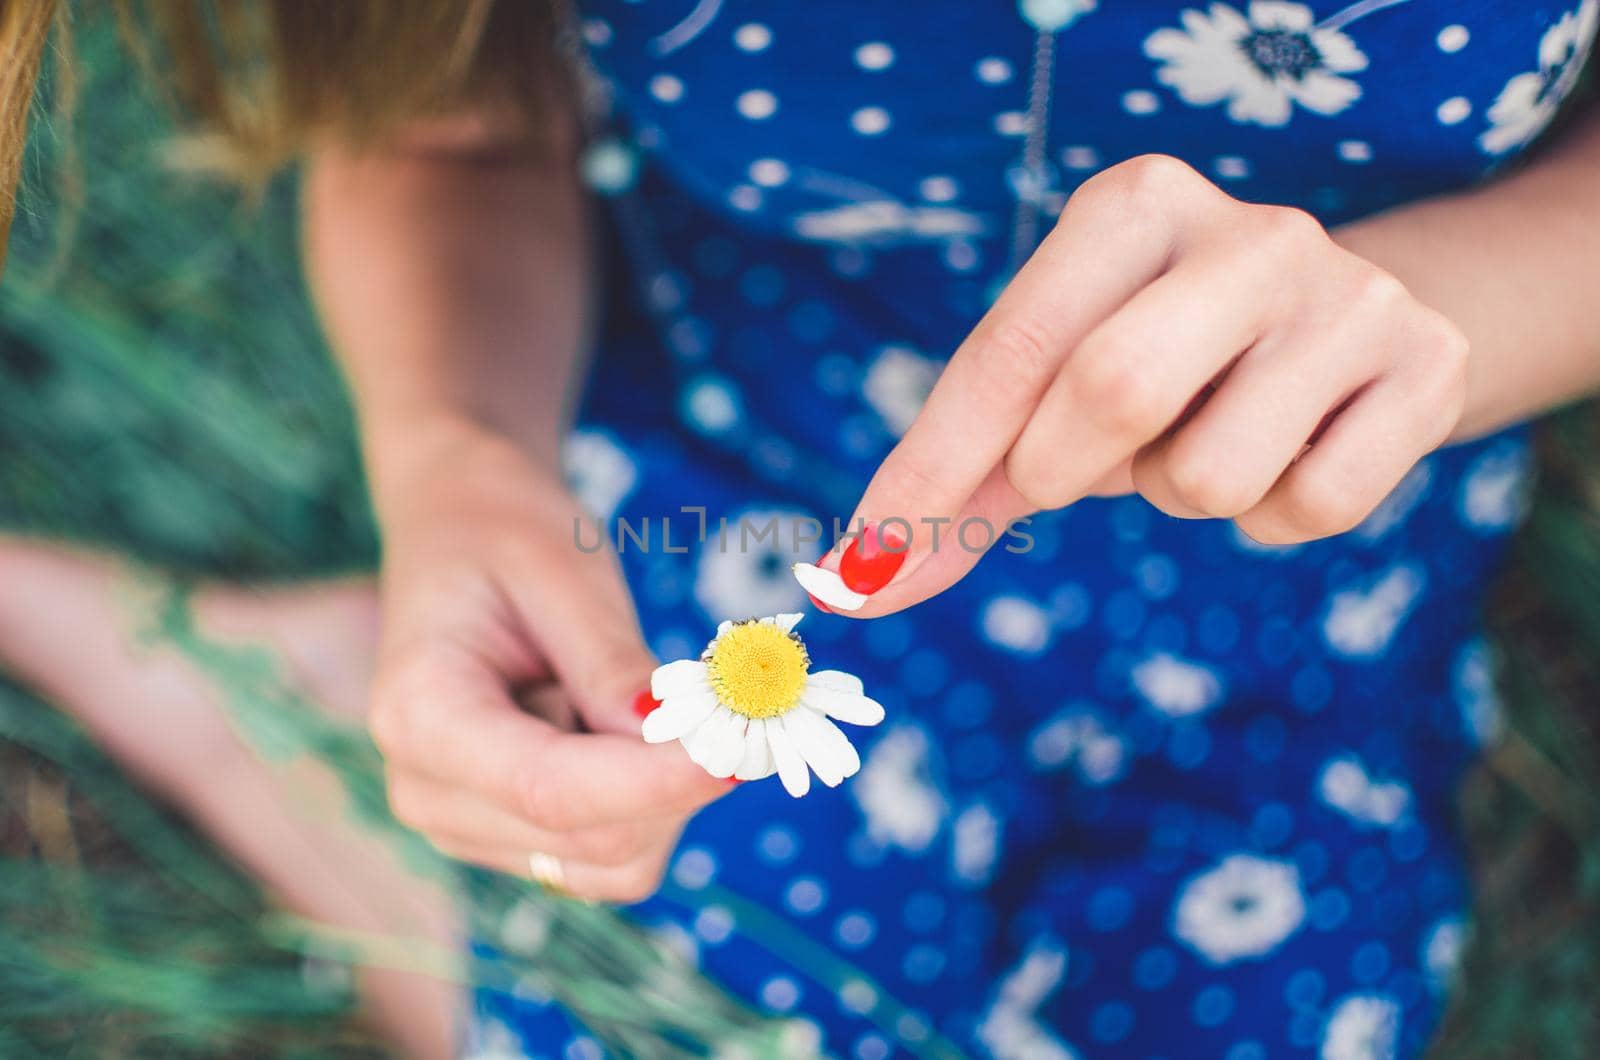 European girl holds a daisy flower and tears off the petals by AndriiDrachuk